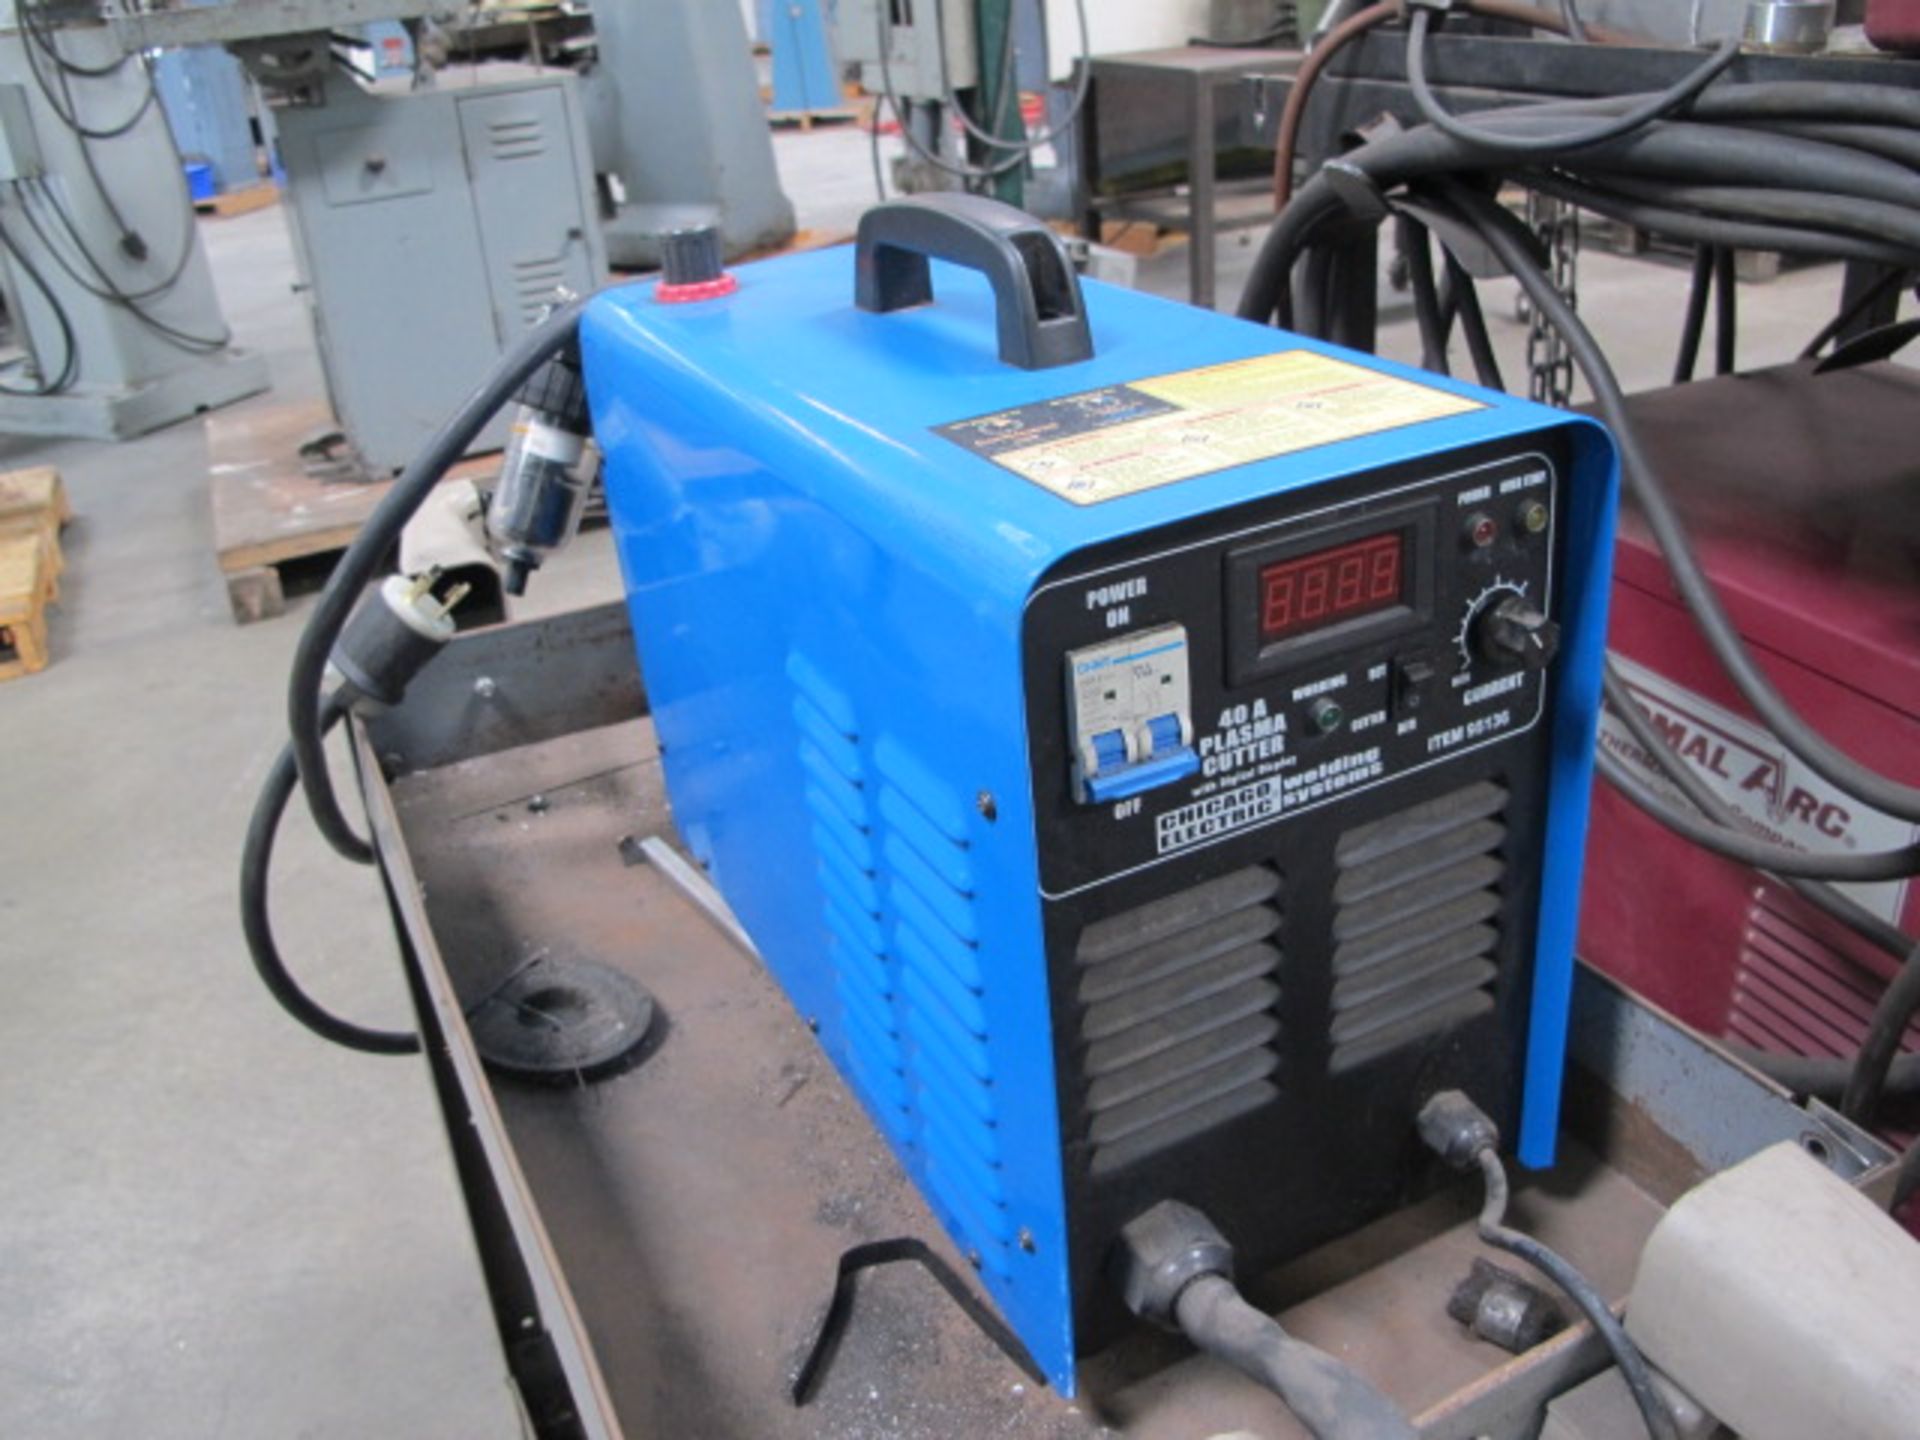 Chicago Electric mdl. 95136 40A Plasma Cutting Power Source - Image 2 of 3